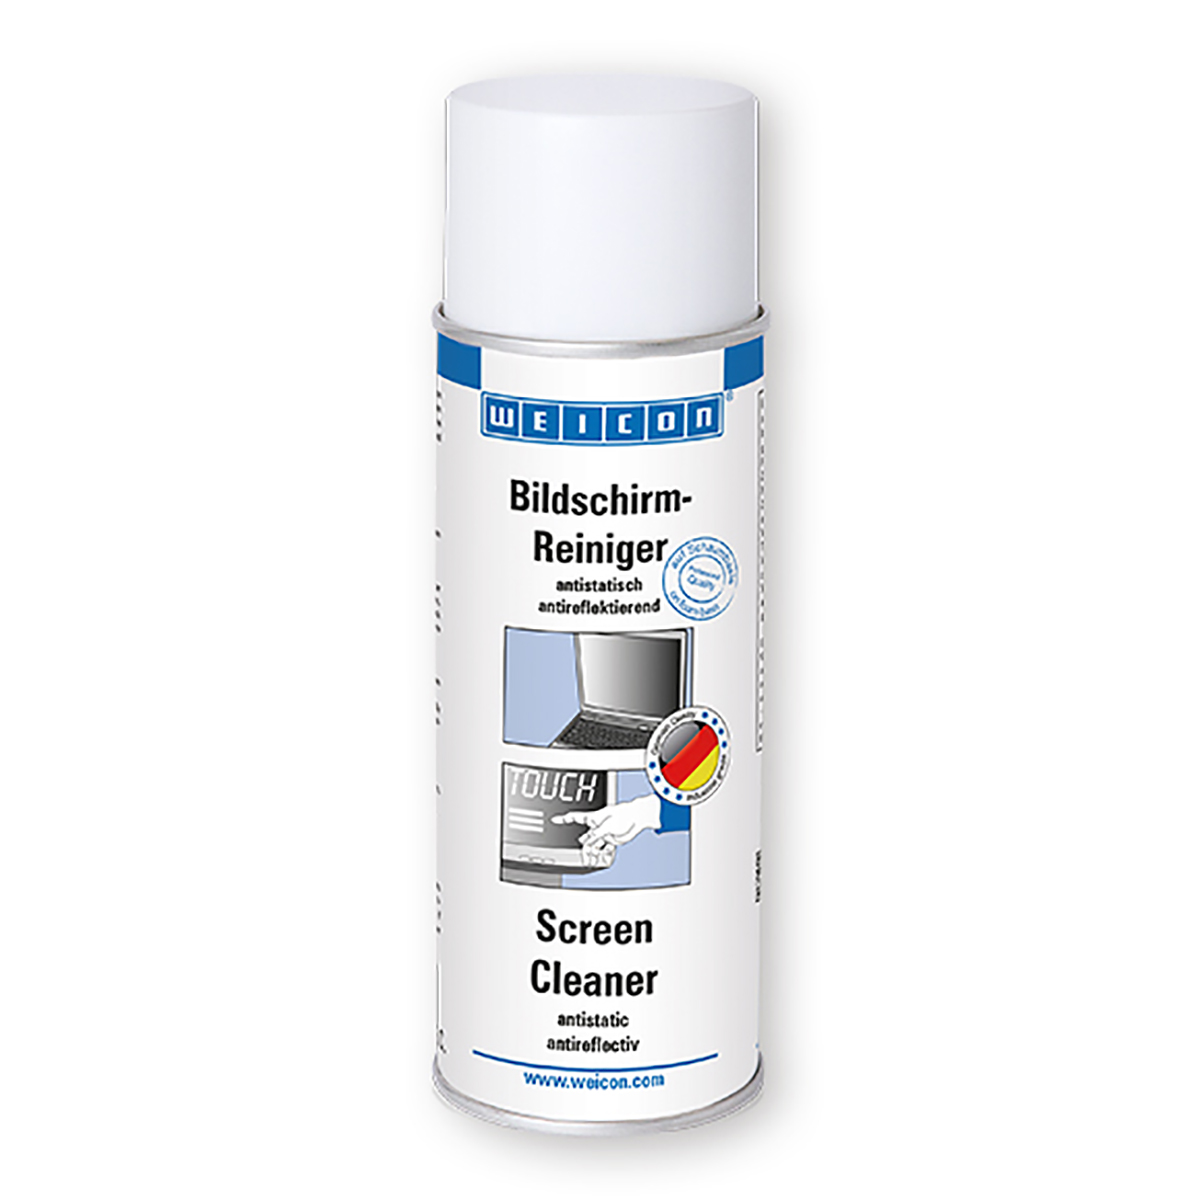 Weicon Screen Cleaner Spray being Used